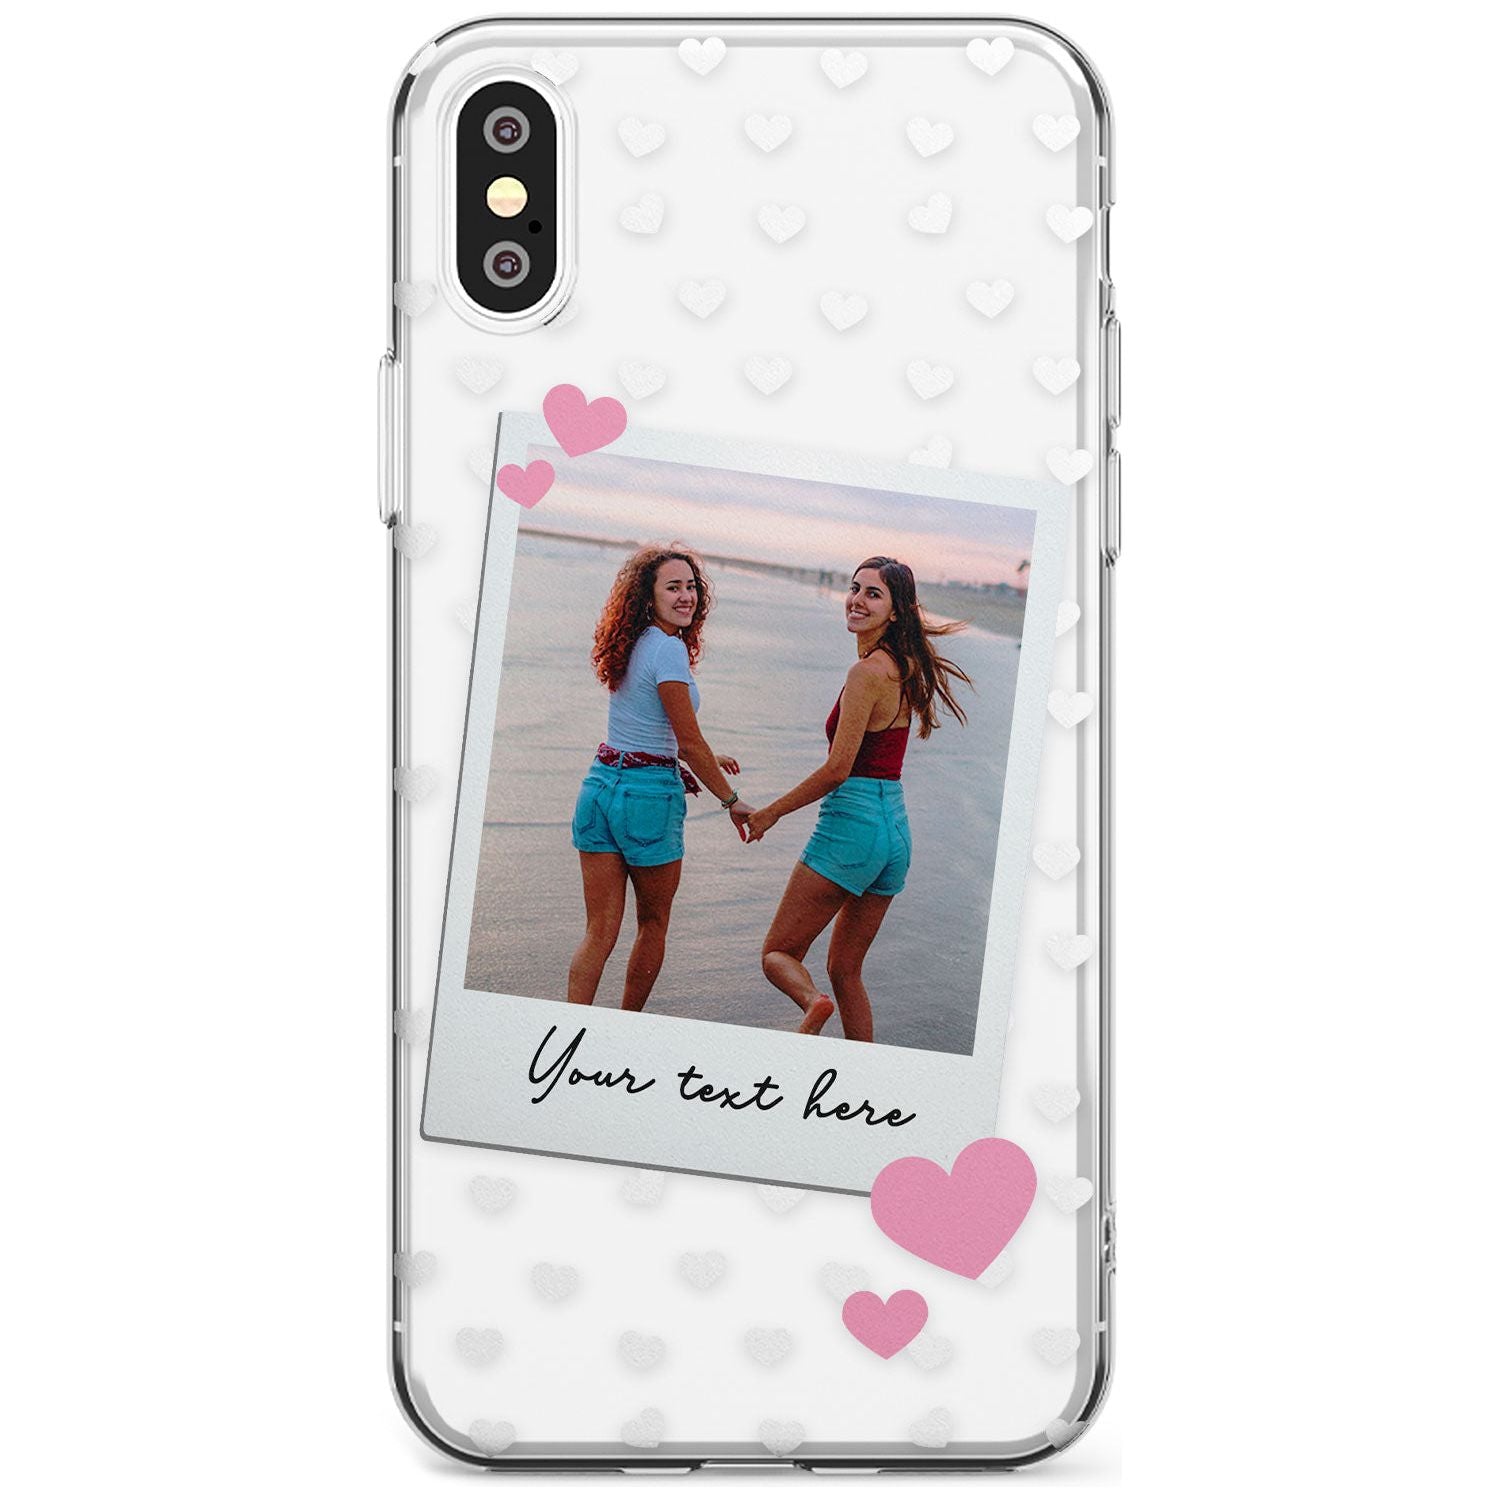 Instant Film & Hearts Black Impact Phone Case for iPhone X XS Max XR